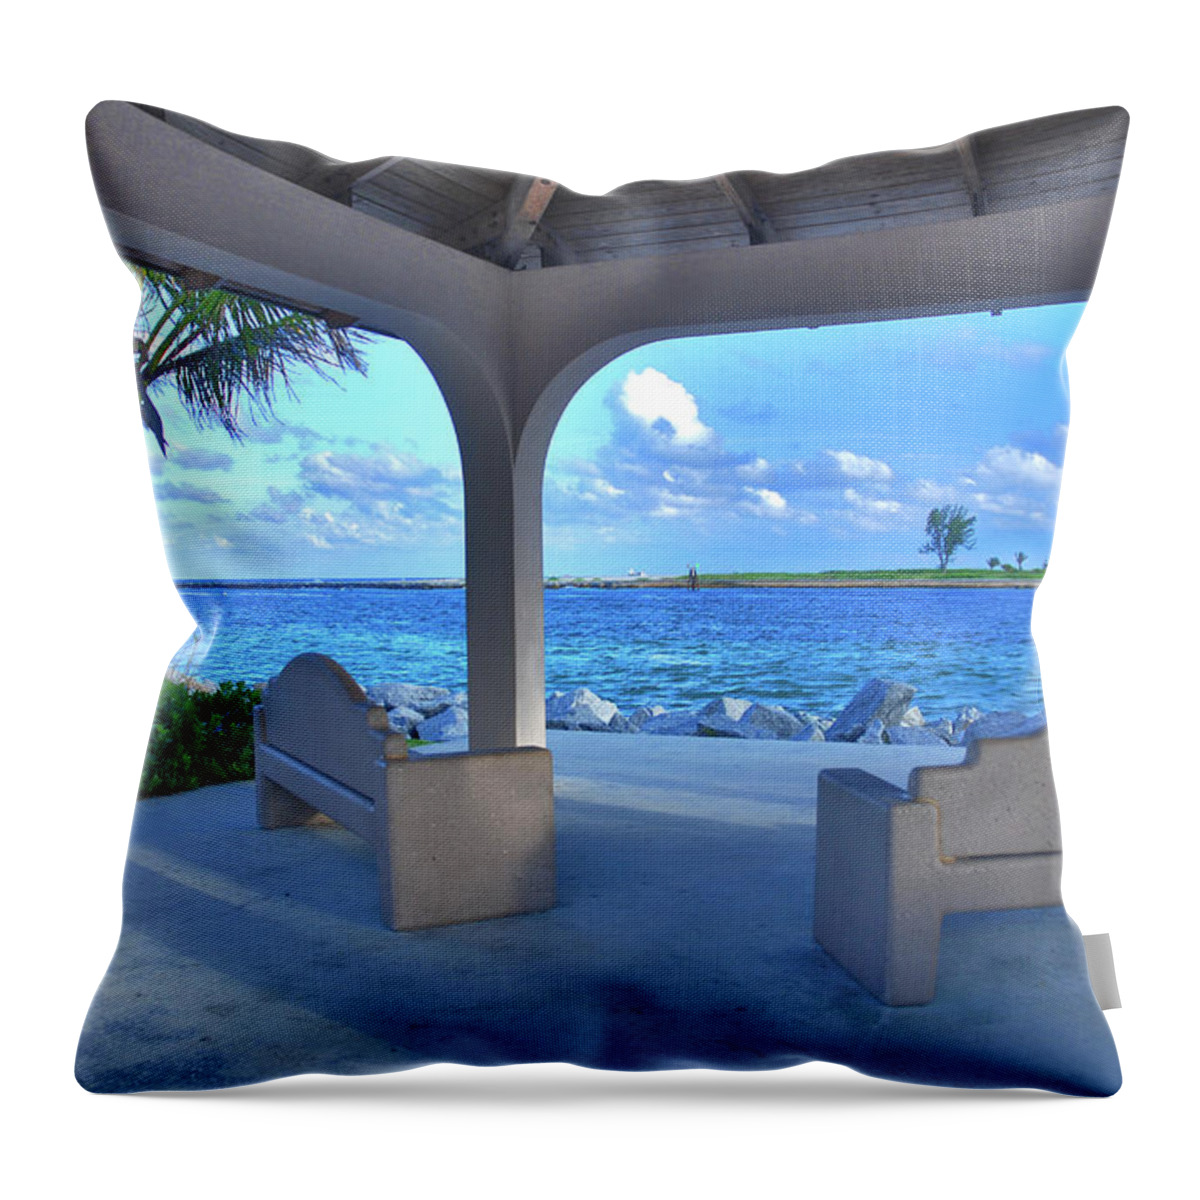  Throw Pillow featuring the photograph 11- Lake Worth Inlet by Joseph Keane